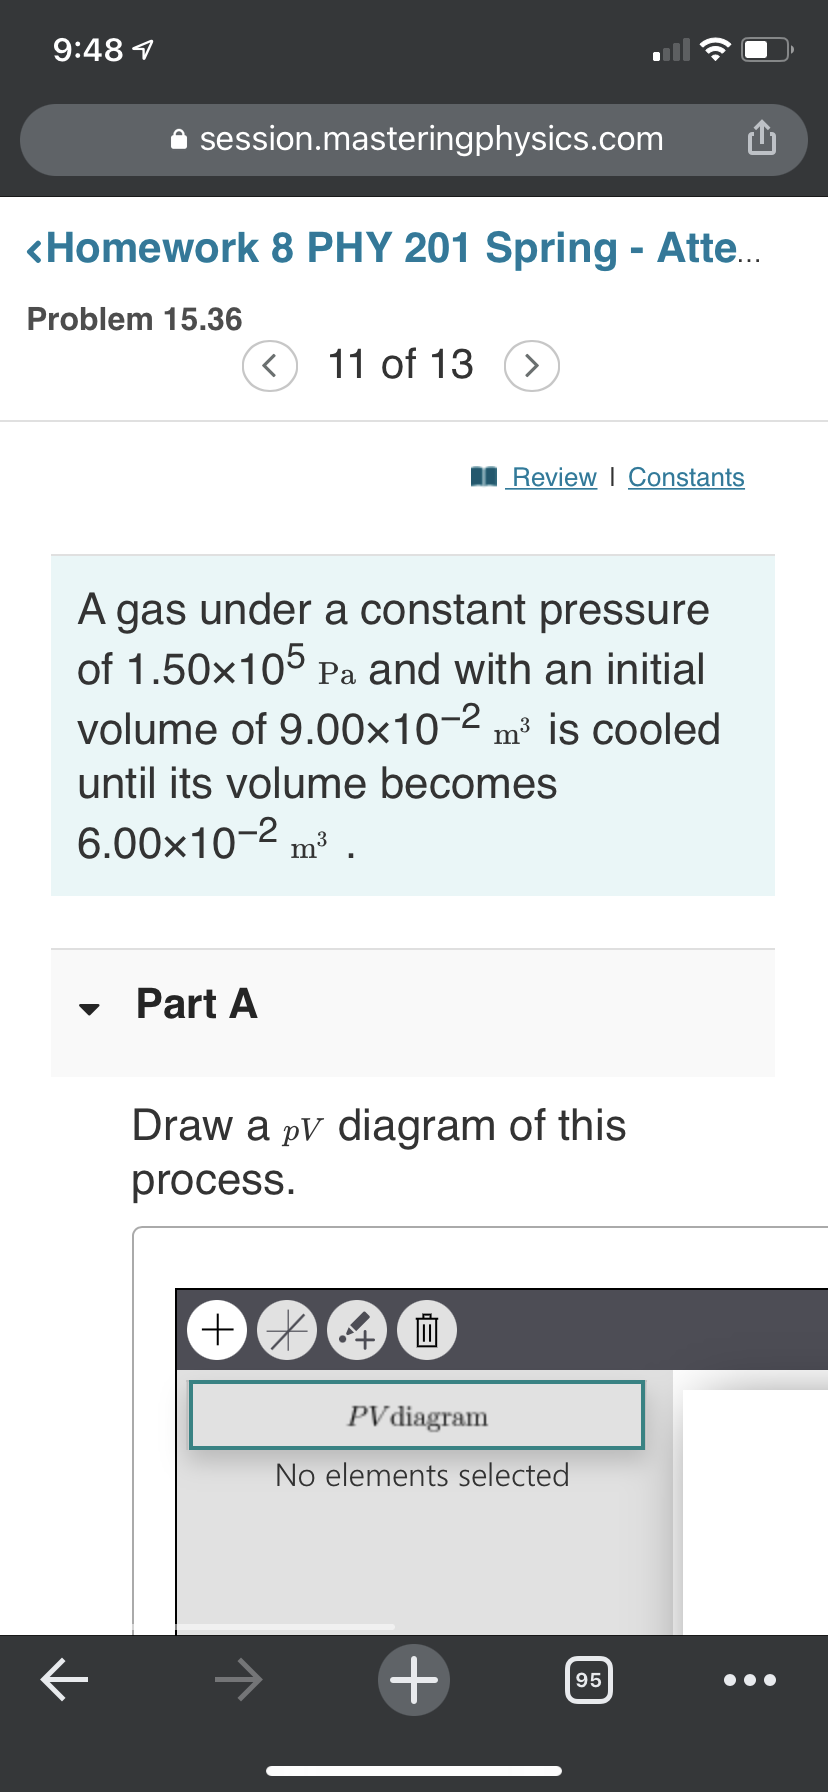 9:48 1
A session.masteringphysics.com
<Homework 8 PHY 201 Spring - Atte..
Problem 15.36
< 11 of 13 (>
I Review I Constants
A gas under a constant pressure
of 1.50x105 Pa and with an initial
volume of 9.00x10-2 m³ is cooled
until its volume becomes
6.00x10-2 m³ .
Part A
Draw a pV diagram of this
process.
PV diagram
No elements selected
->
95
